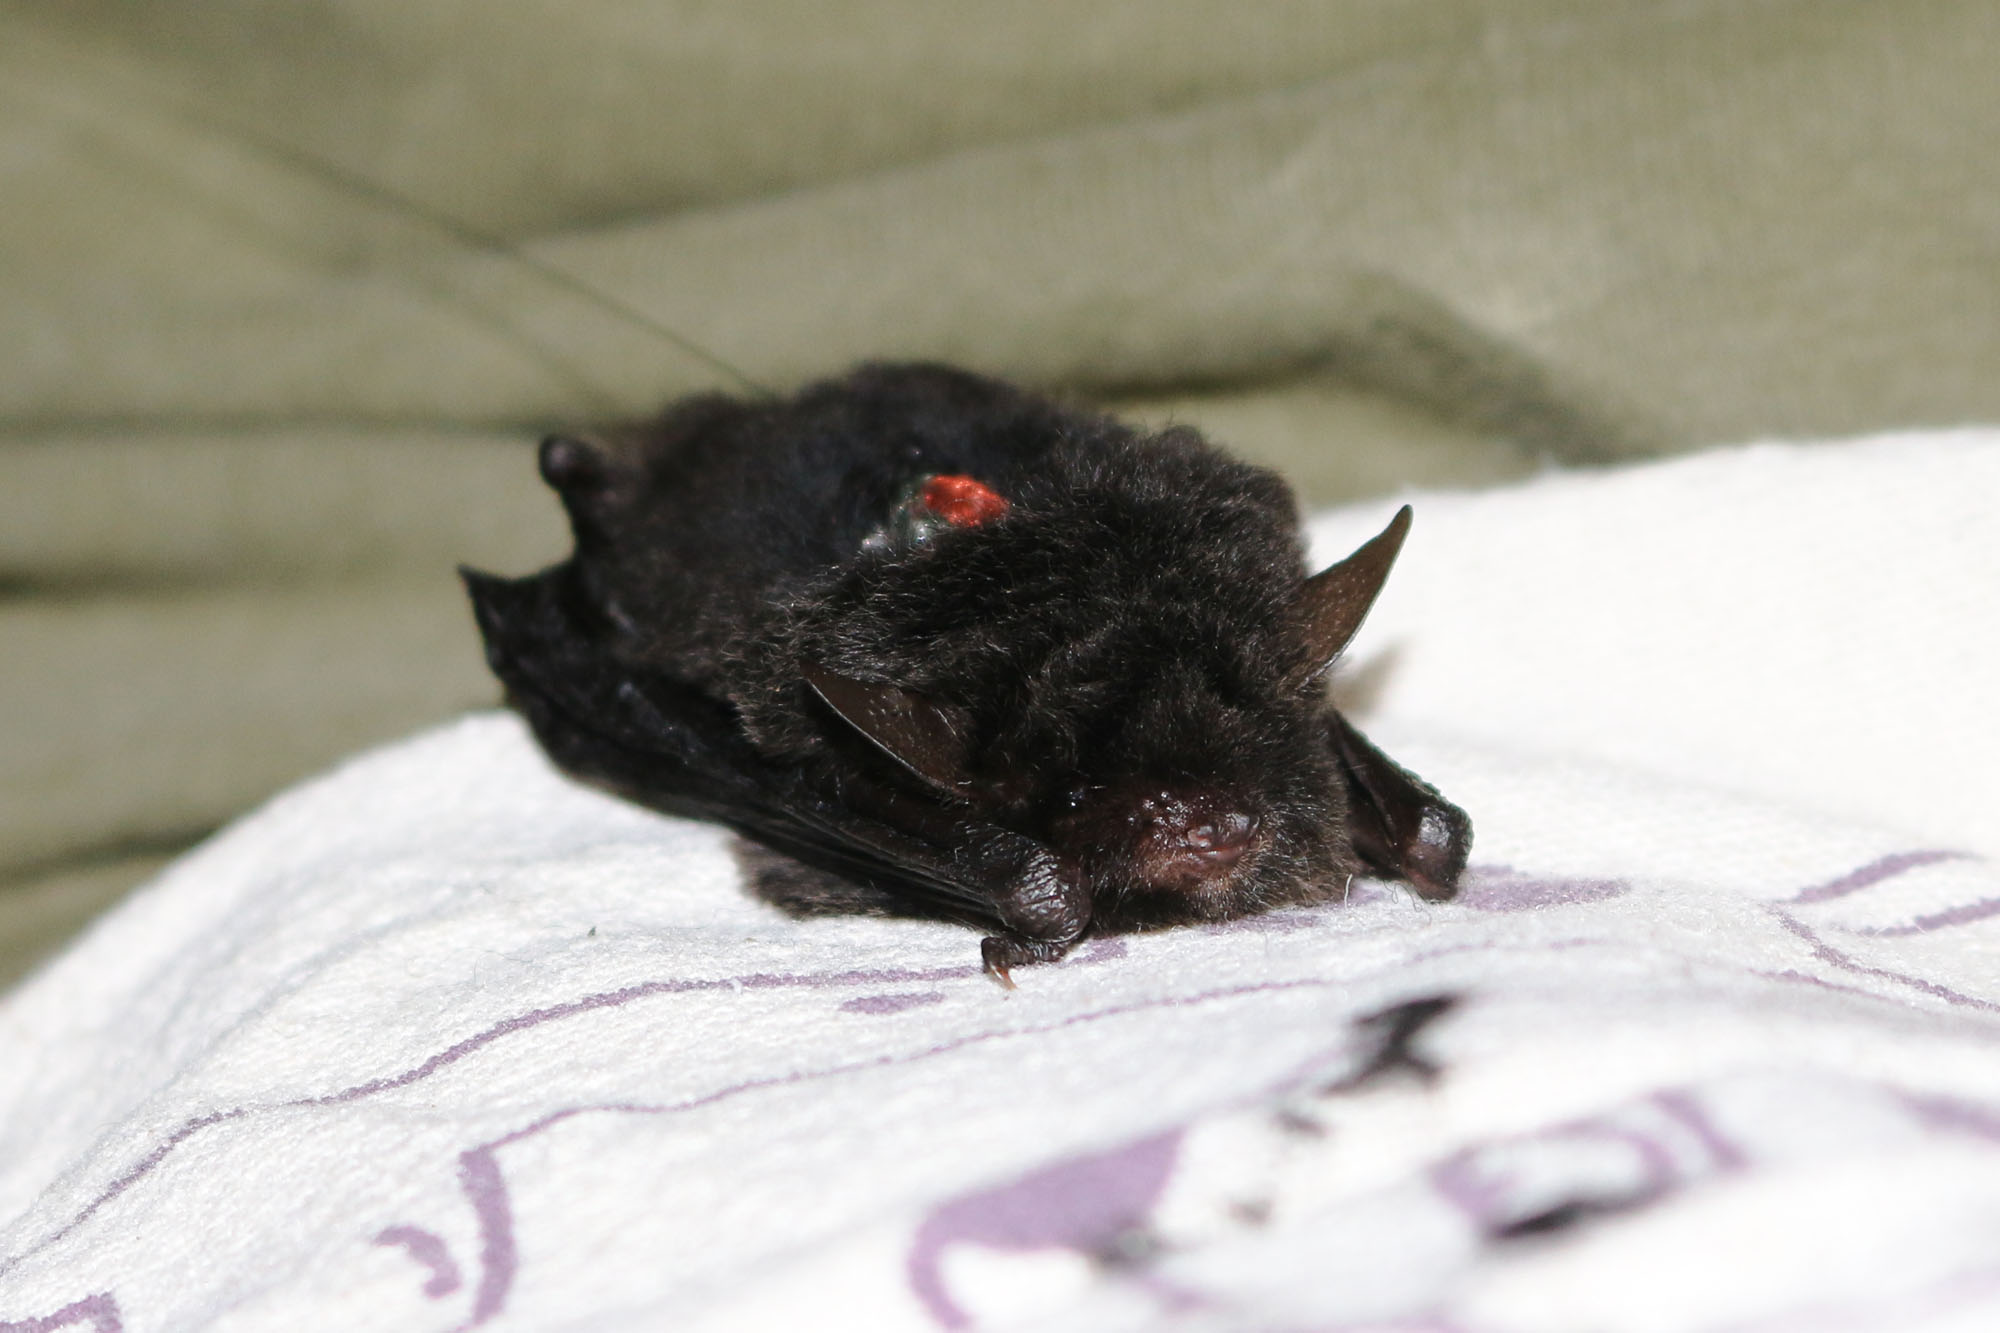 The critically endangered Yanbaru whiskered bat was discovered in a former U.S. military training area on Okinawa island, the first such sighting in 22 years. | JASON PREBLE